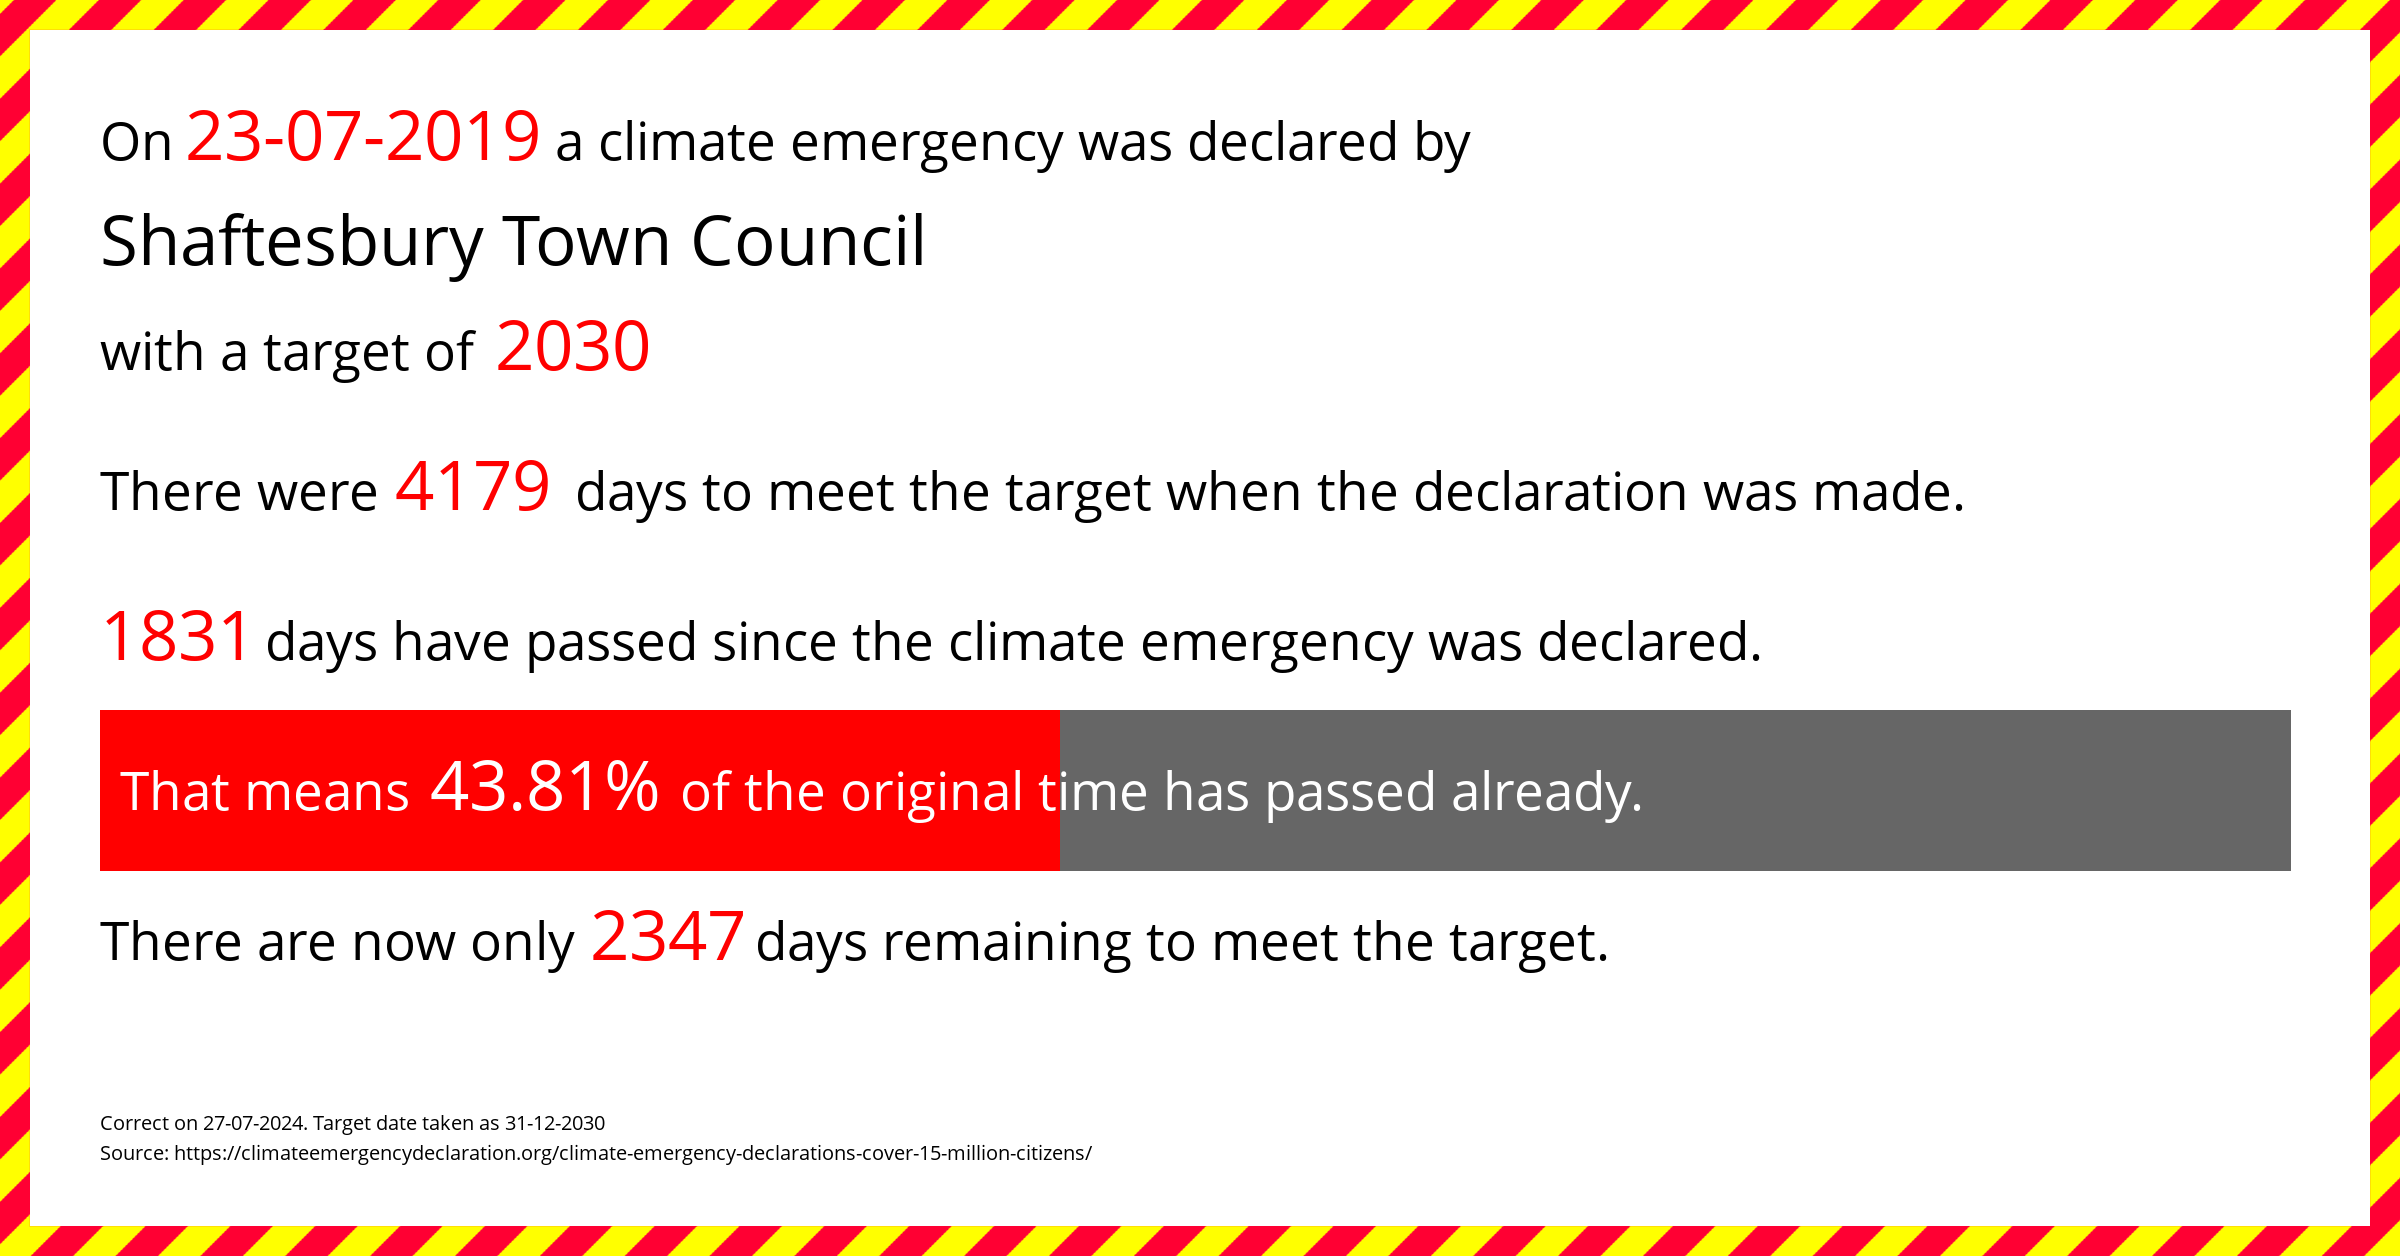 Shaftesbury Town Council declared a Climate emergency on Tuesday 23rd July 2019, with a target of 2030.